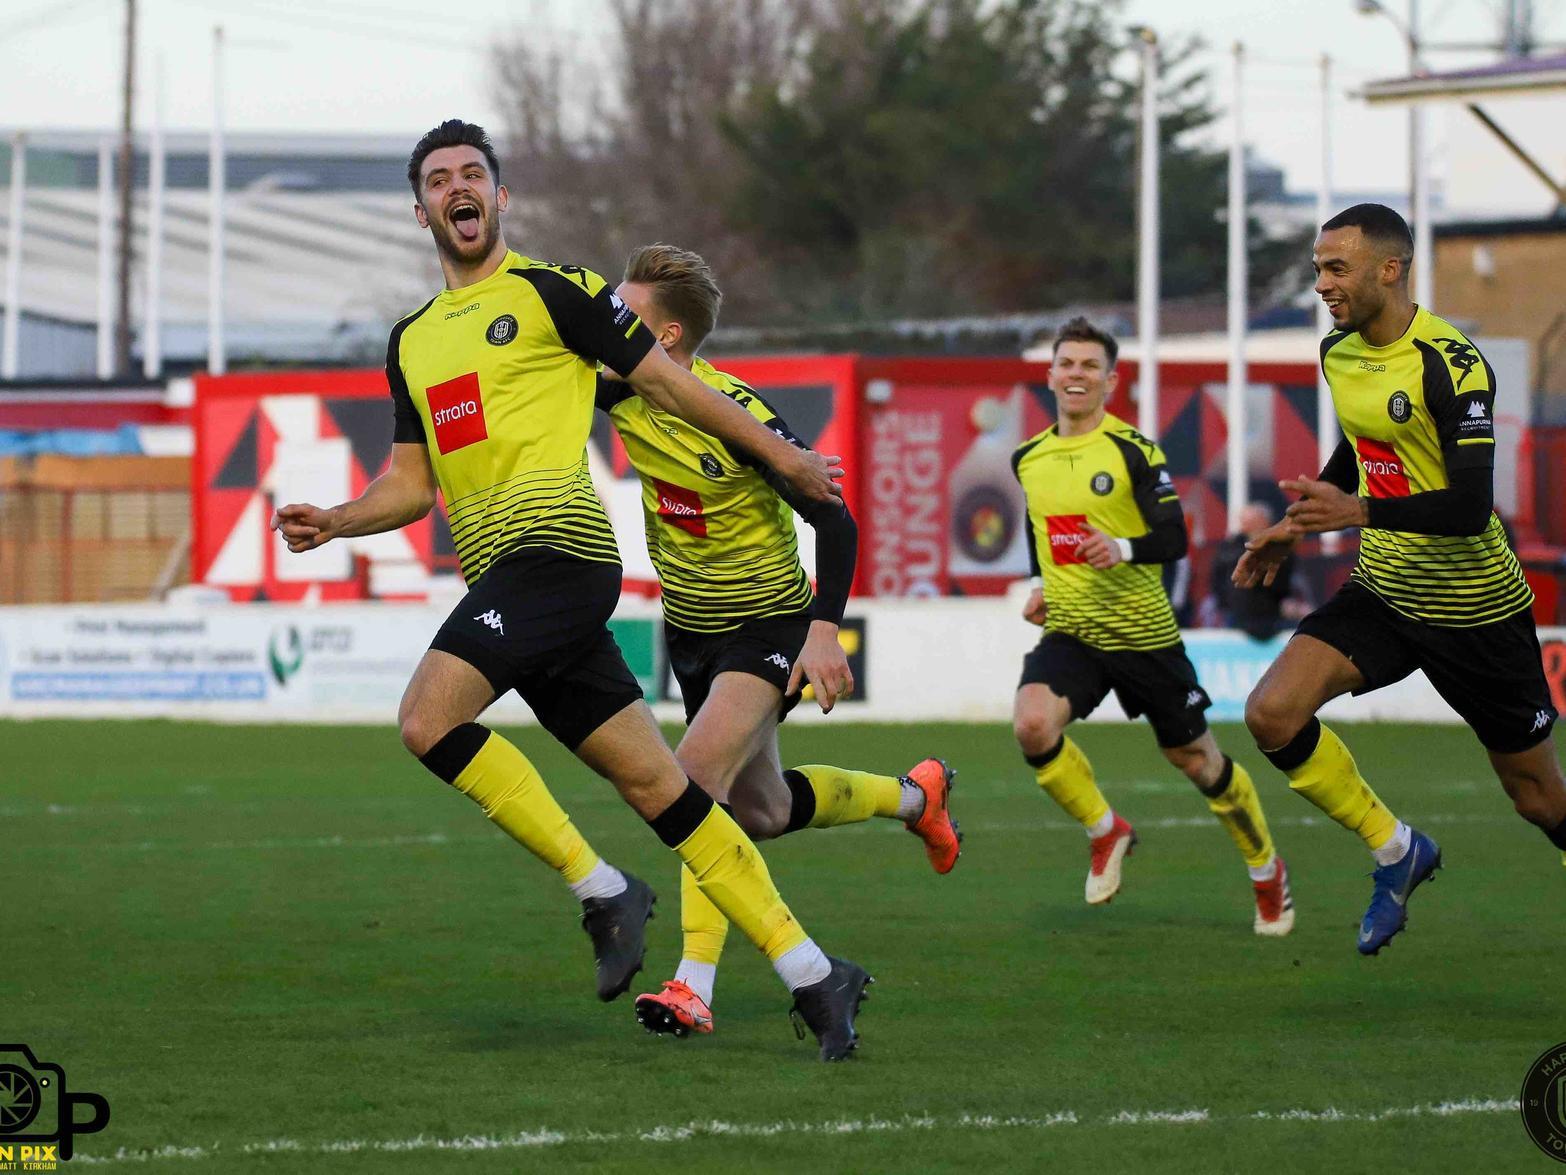 Connor Hall scored a stunning goal to set Harrogate on their way to three points at Ebbsfleet United.